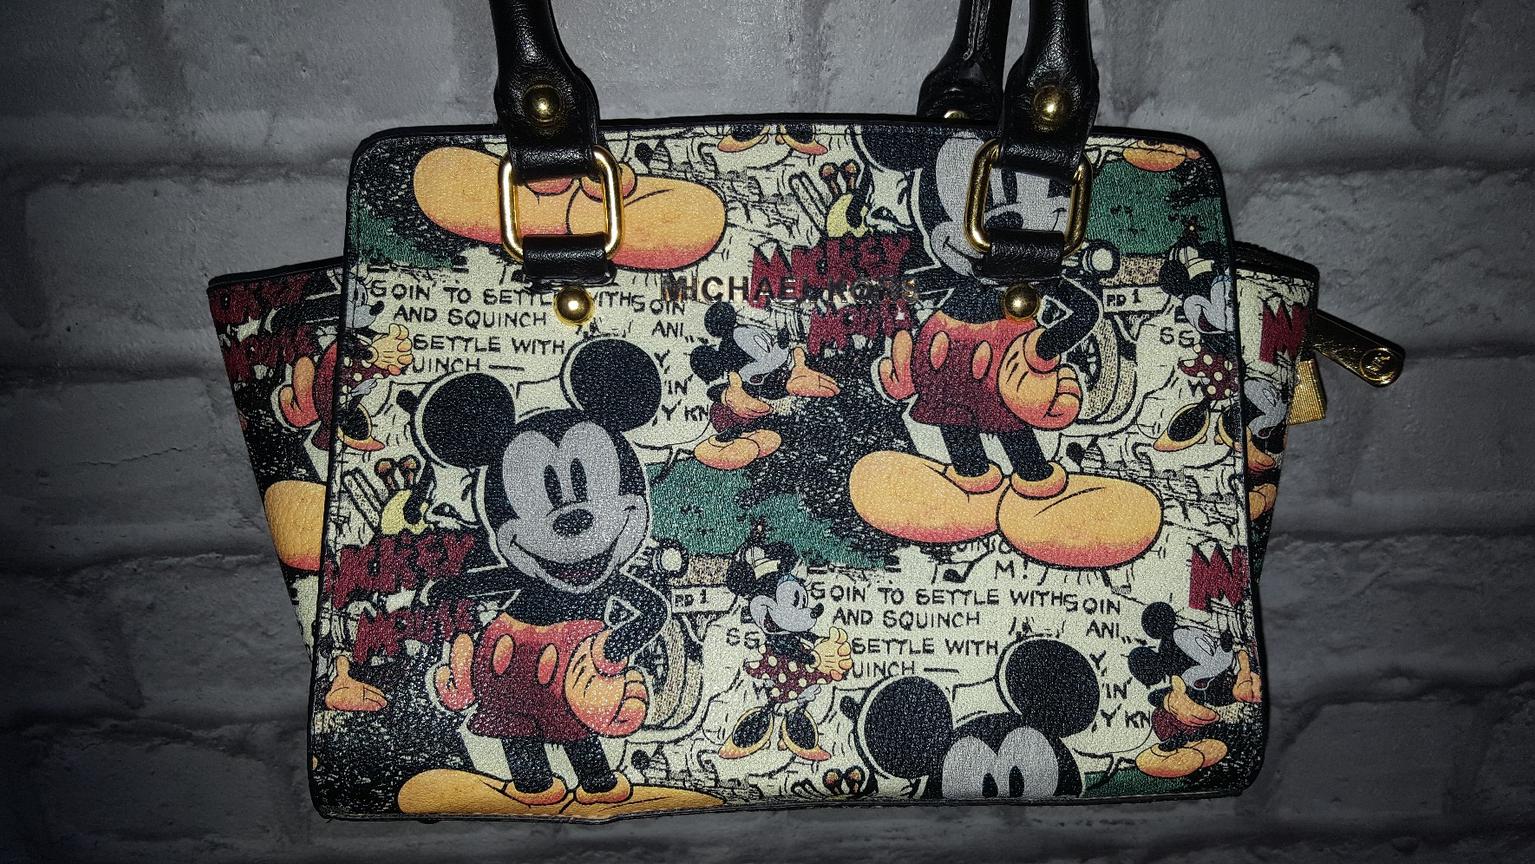 michael kors mickey mouse backpack